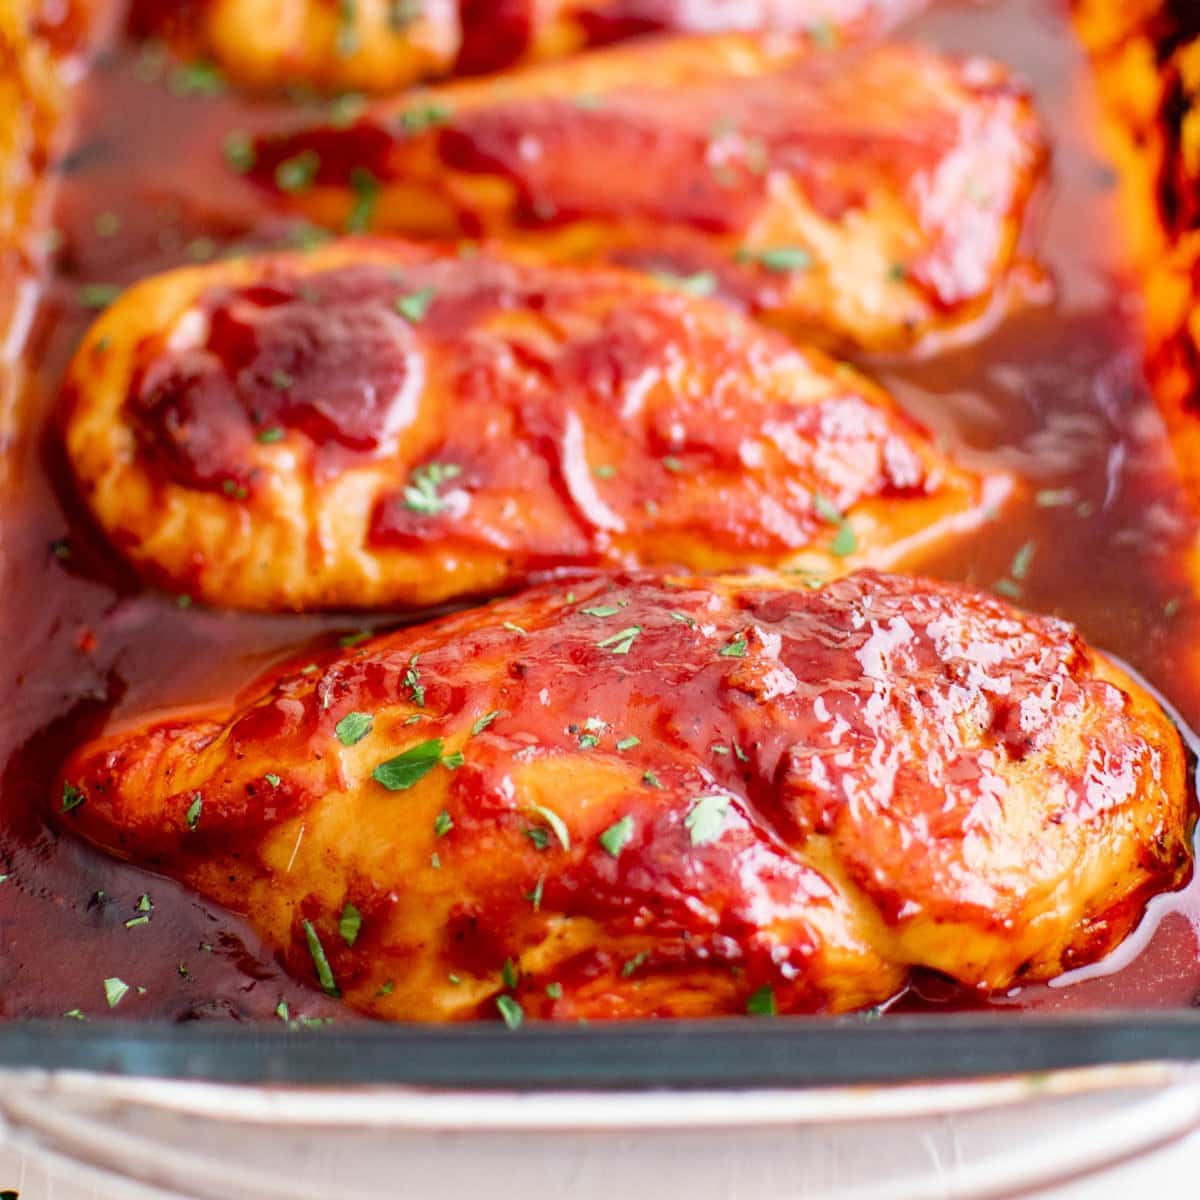 Two Ingredient Crispy Oven Baked BBQ Chicken